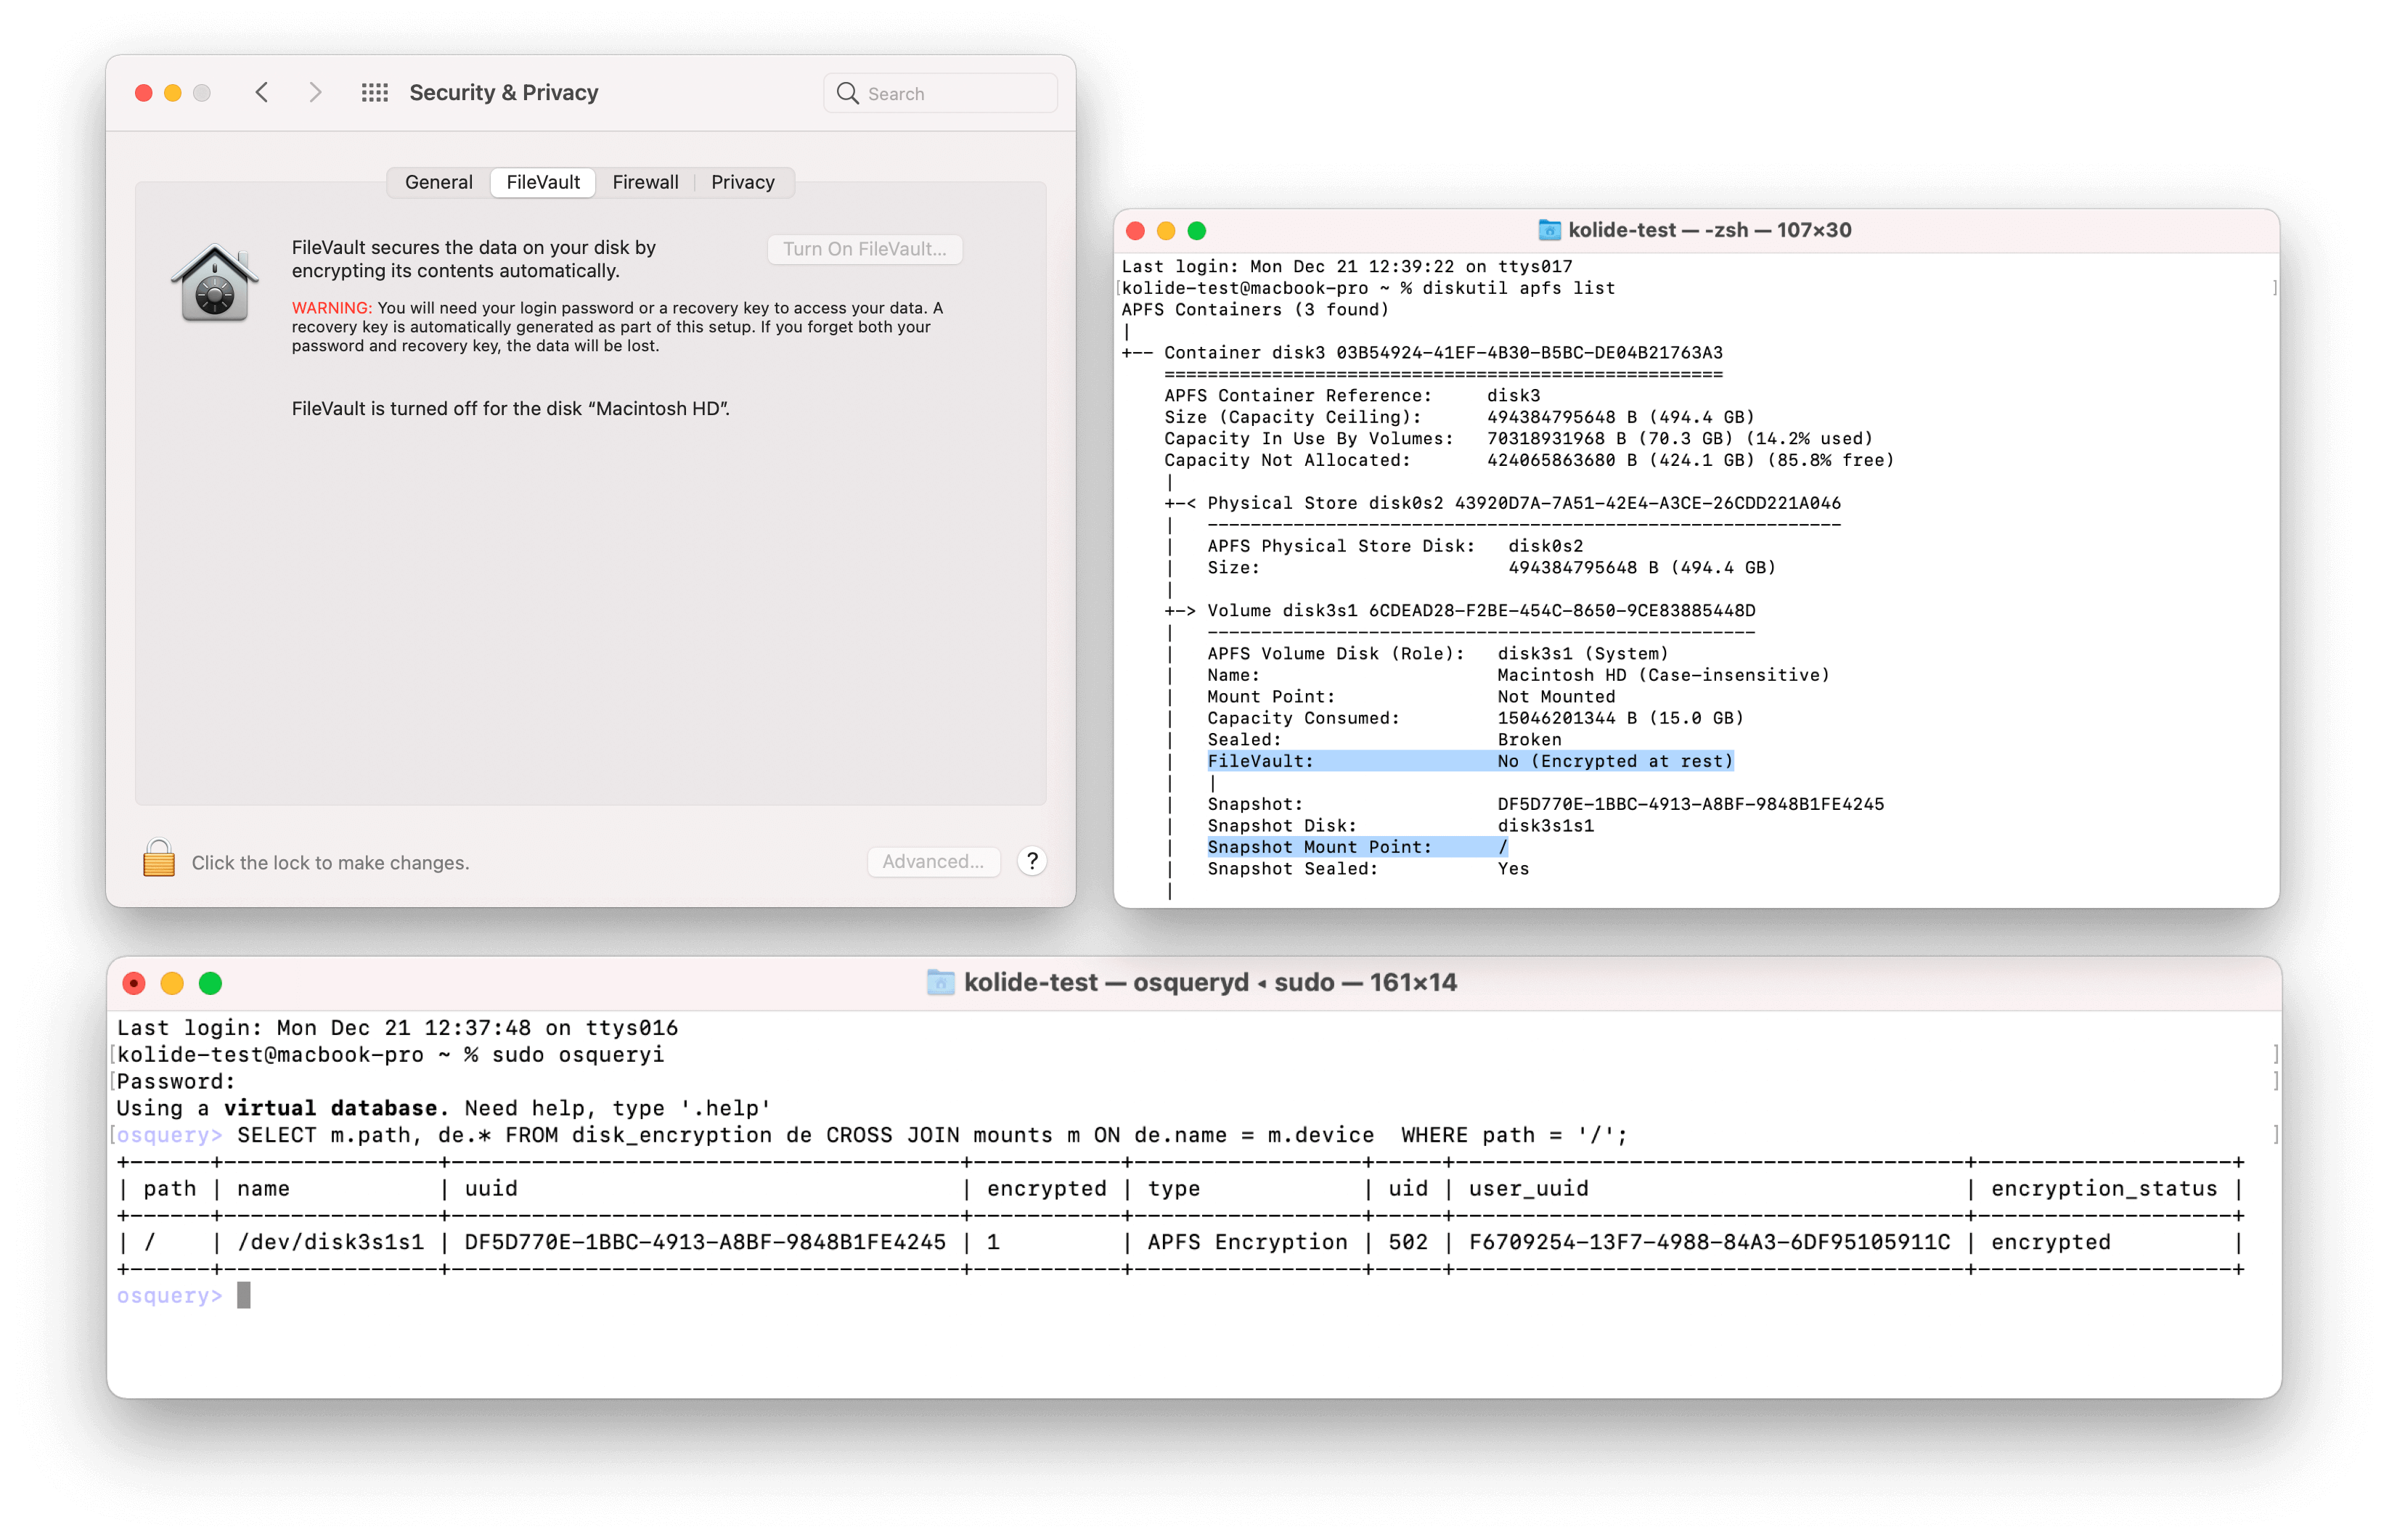 Three screenshots of macOS. THe first is the macOS System Preferences FileVault status showing it disabled. The second is a terminal showing the output of `diskutil apfs list` which indicates the disk is encrypted but FileVault is off. THe third screenshot is a terminal running `osqueryi` showing the output of the query SELECT m.path, de.*, FROM disk_encryption de CROSS JOIN mounts m ON de.name = m.device WHERE path = '/'; which indicates the disk is encrypted but does not list the Filevault status